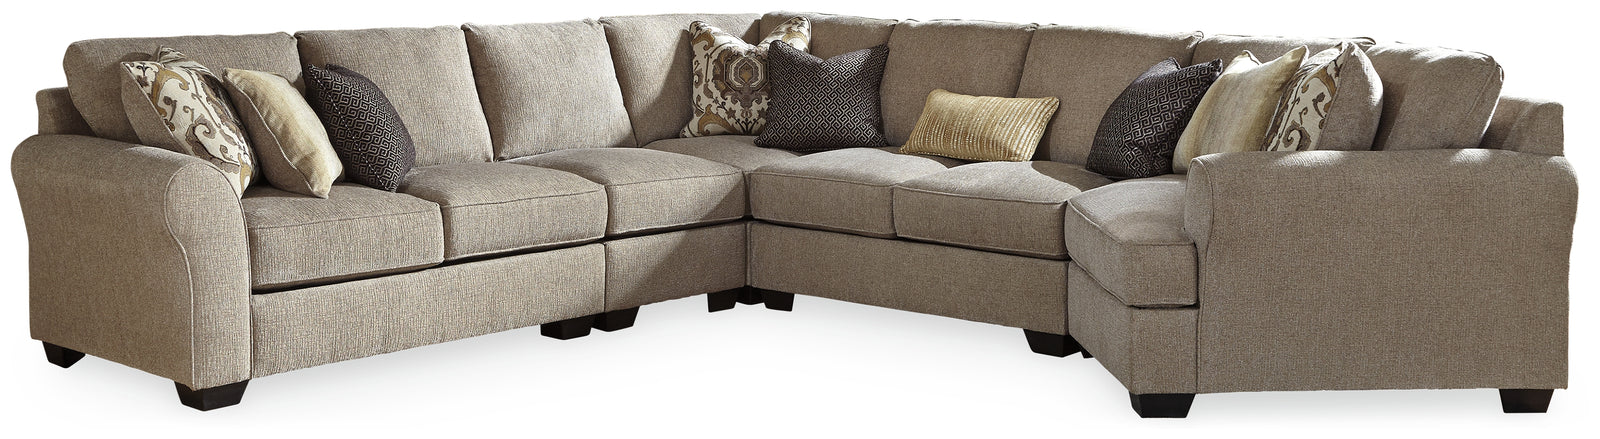 Pantomine Driftwood Chenille 5-Piece Sectional With Cuddler